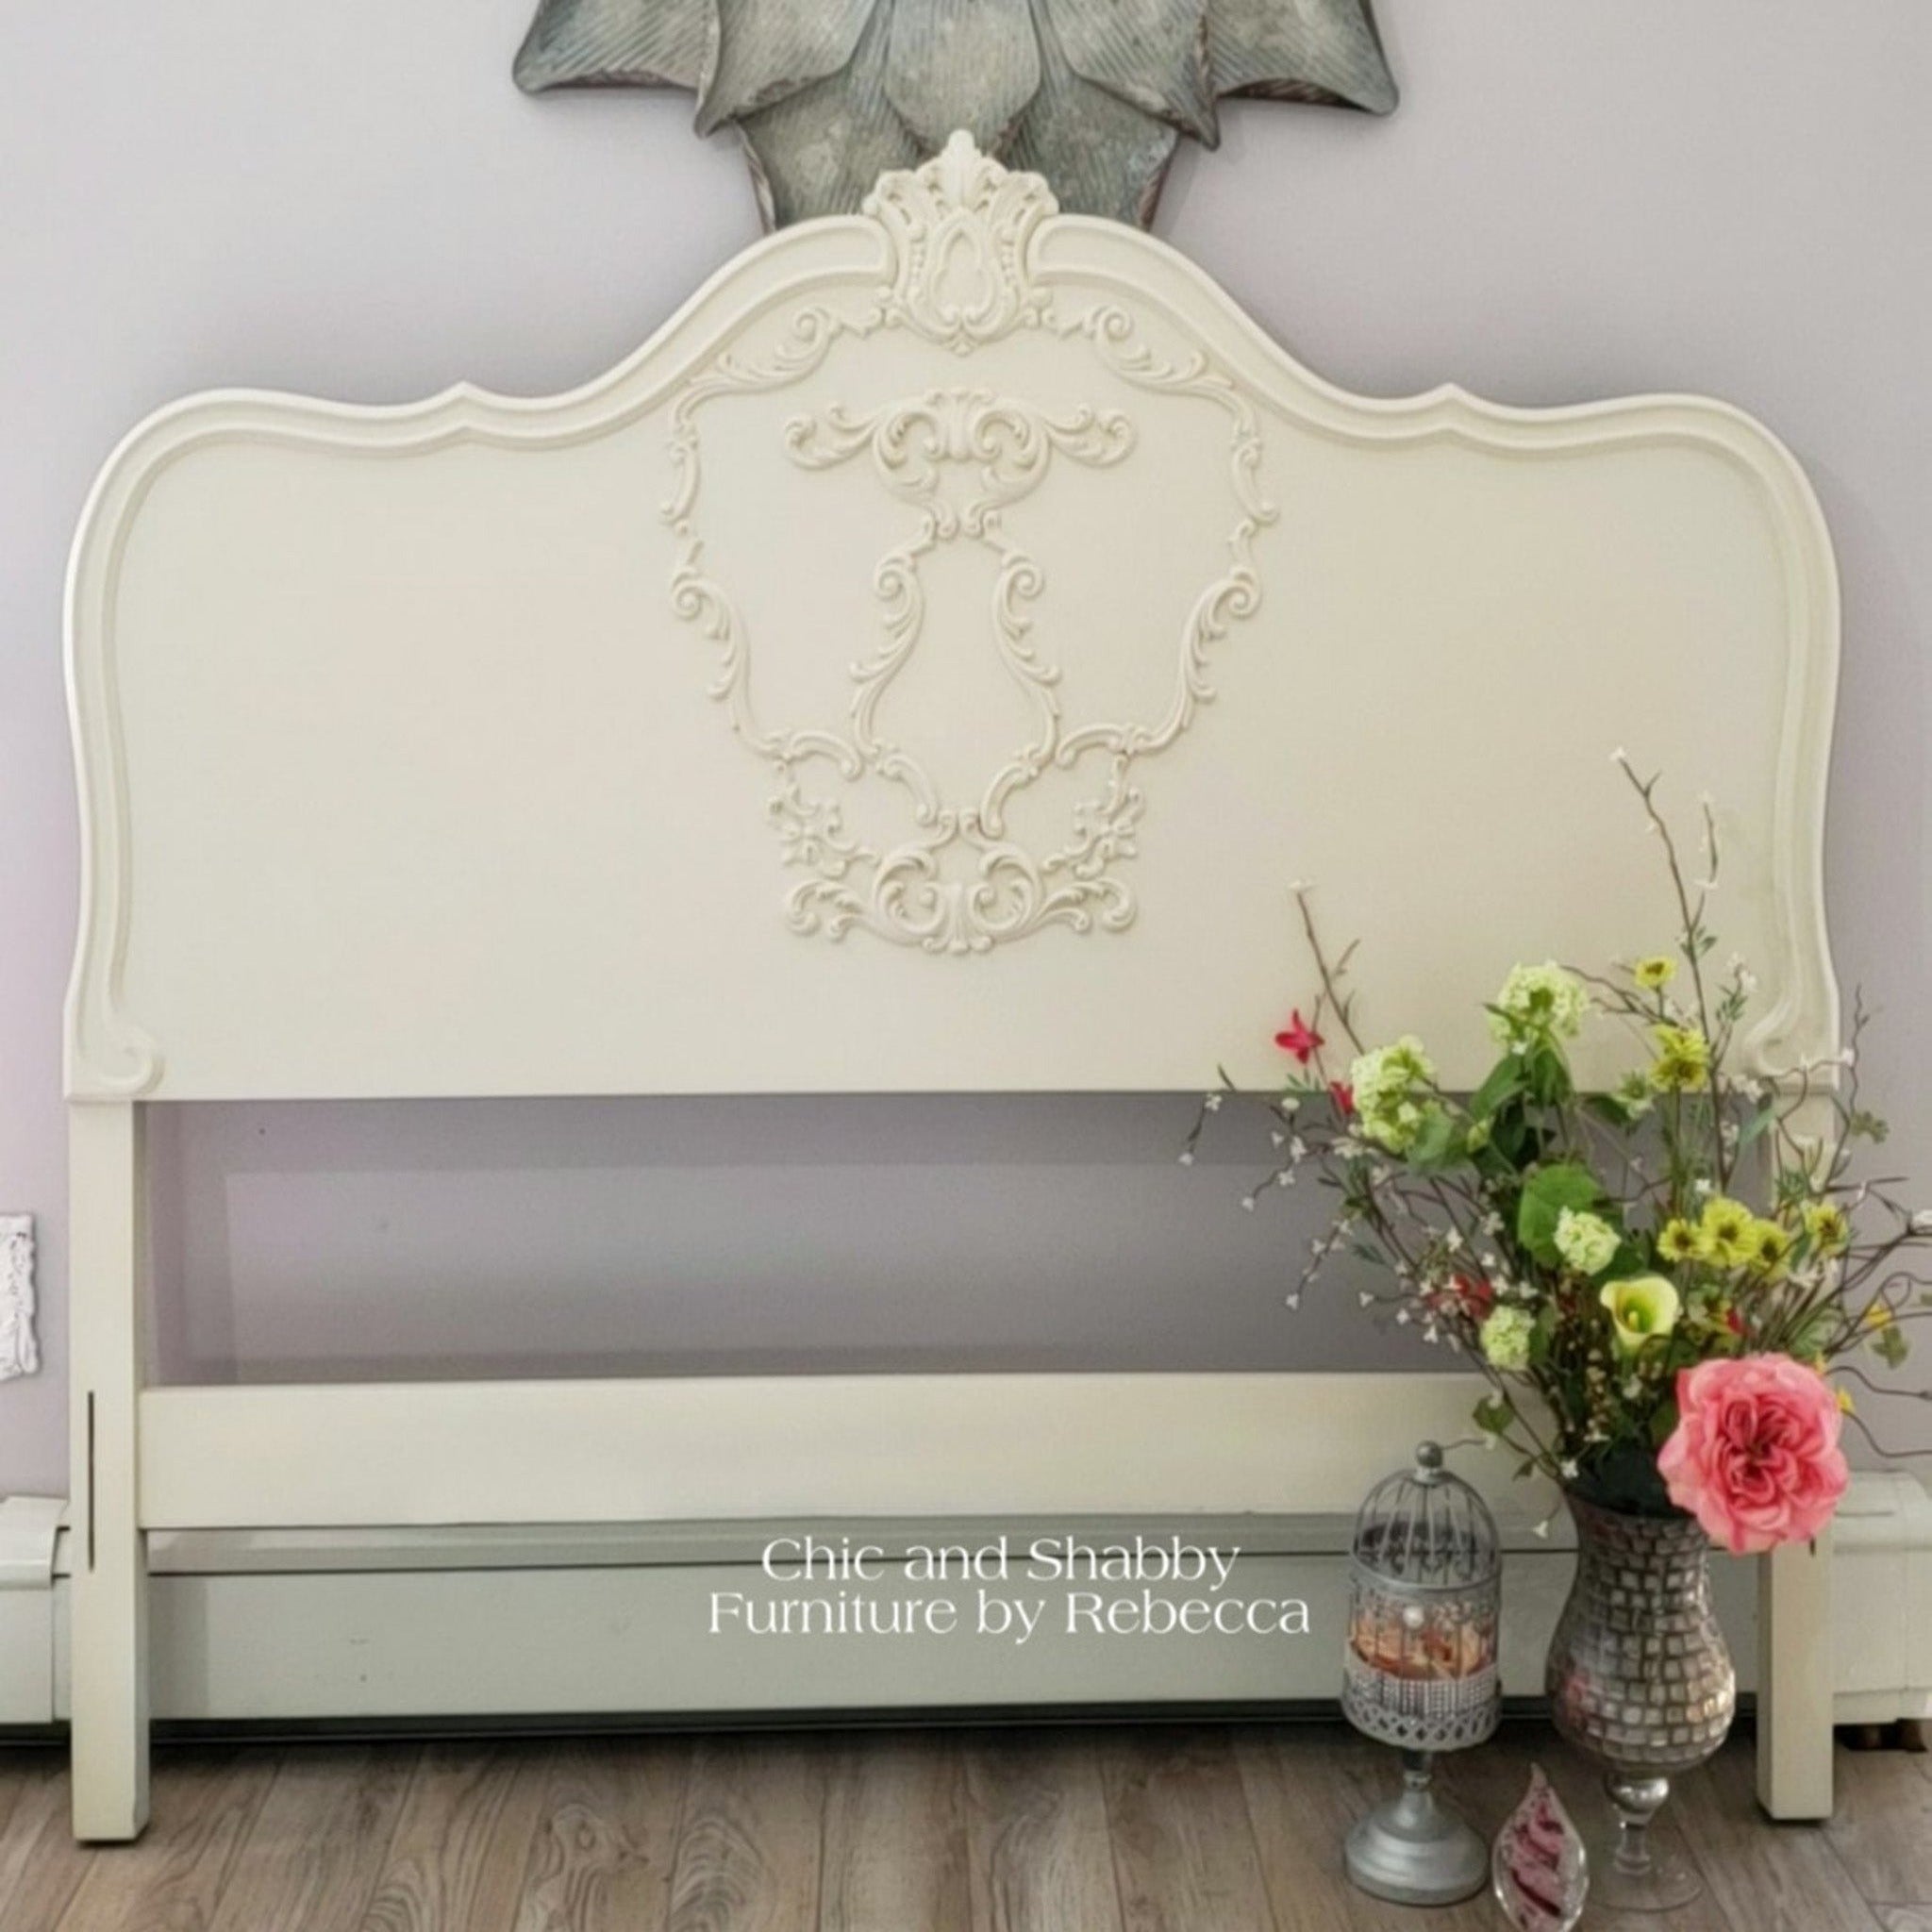 A vintage headboard refurbished by Chic and Shabby Furniture by Rebecca is painted in Dixie Belle's Drop Cloth chalk mineral paint.